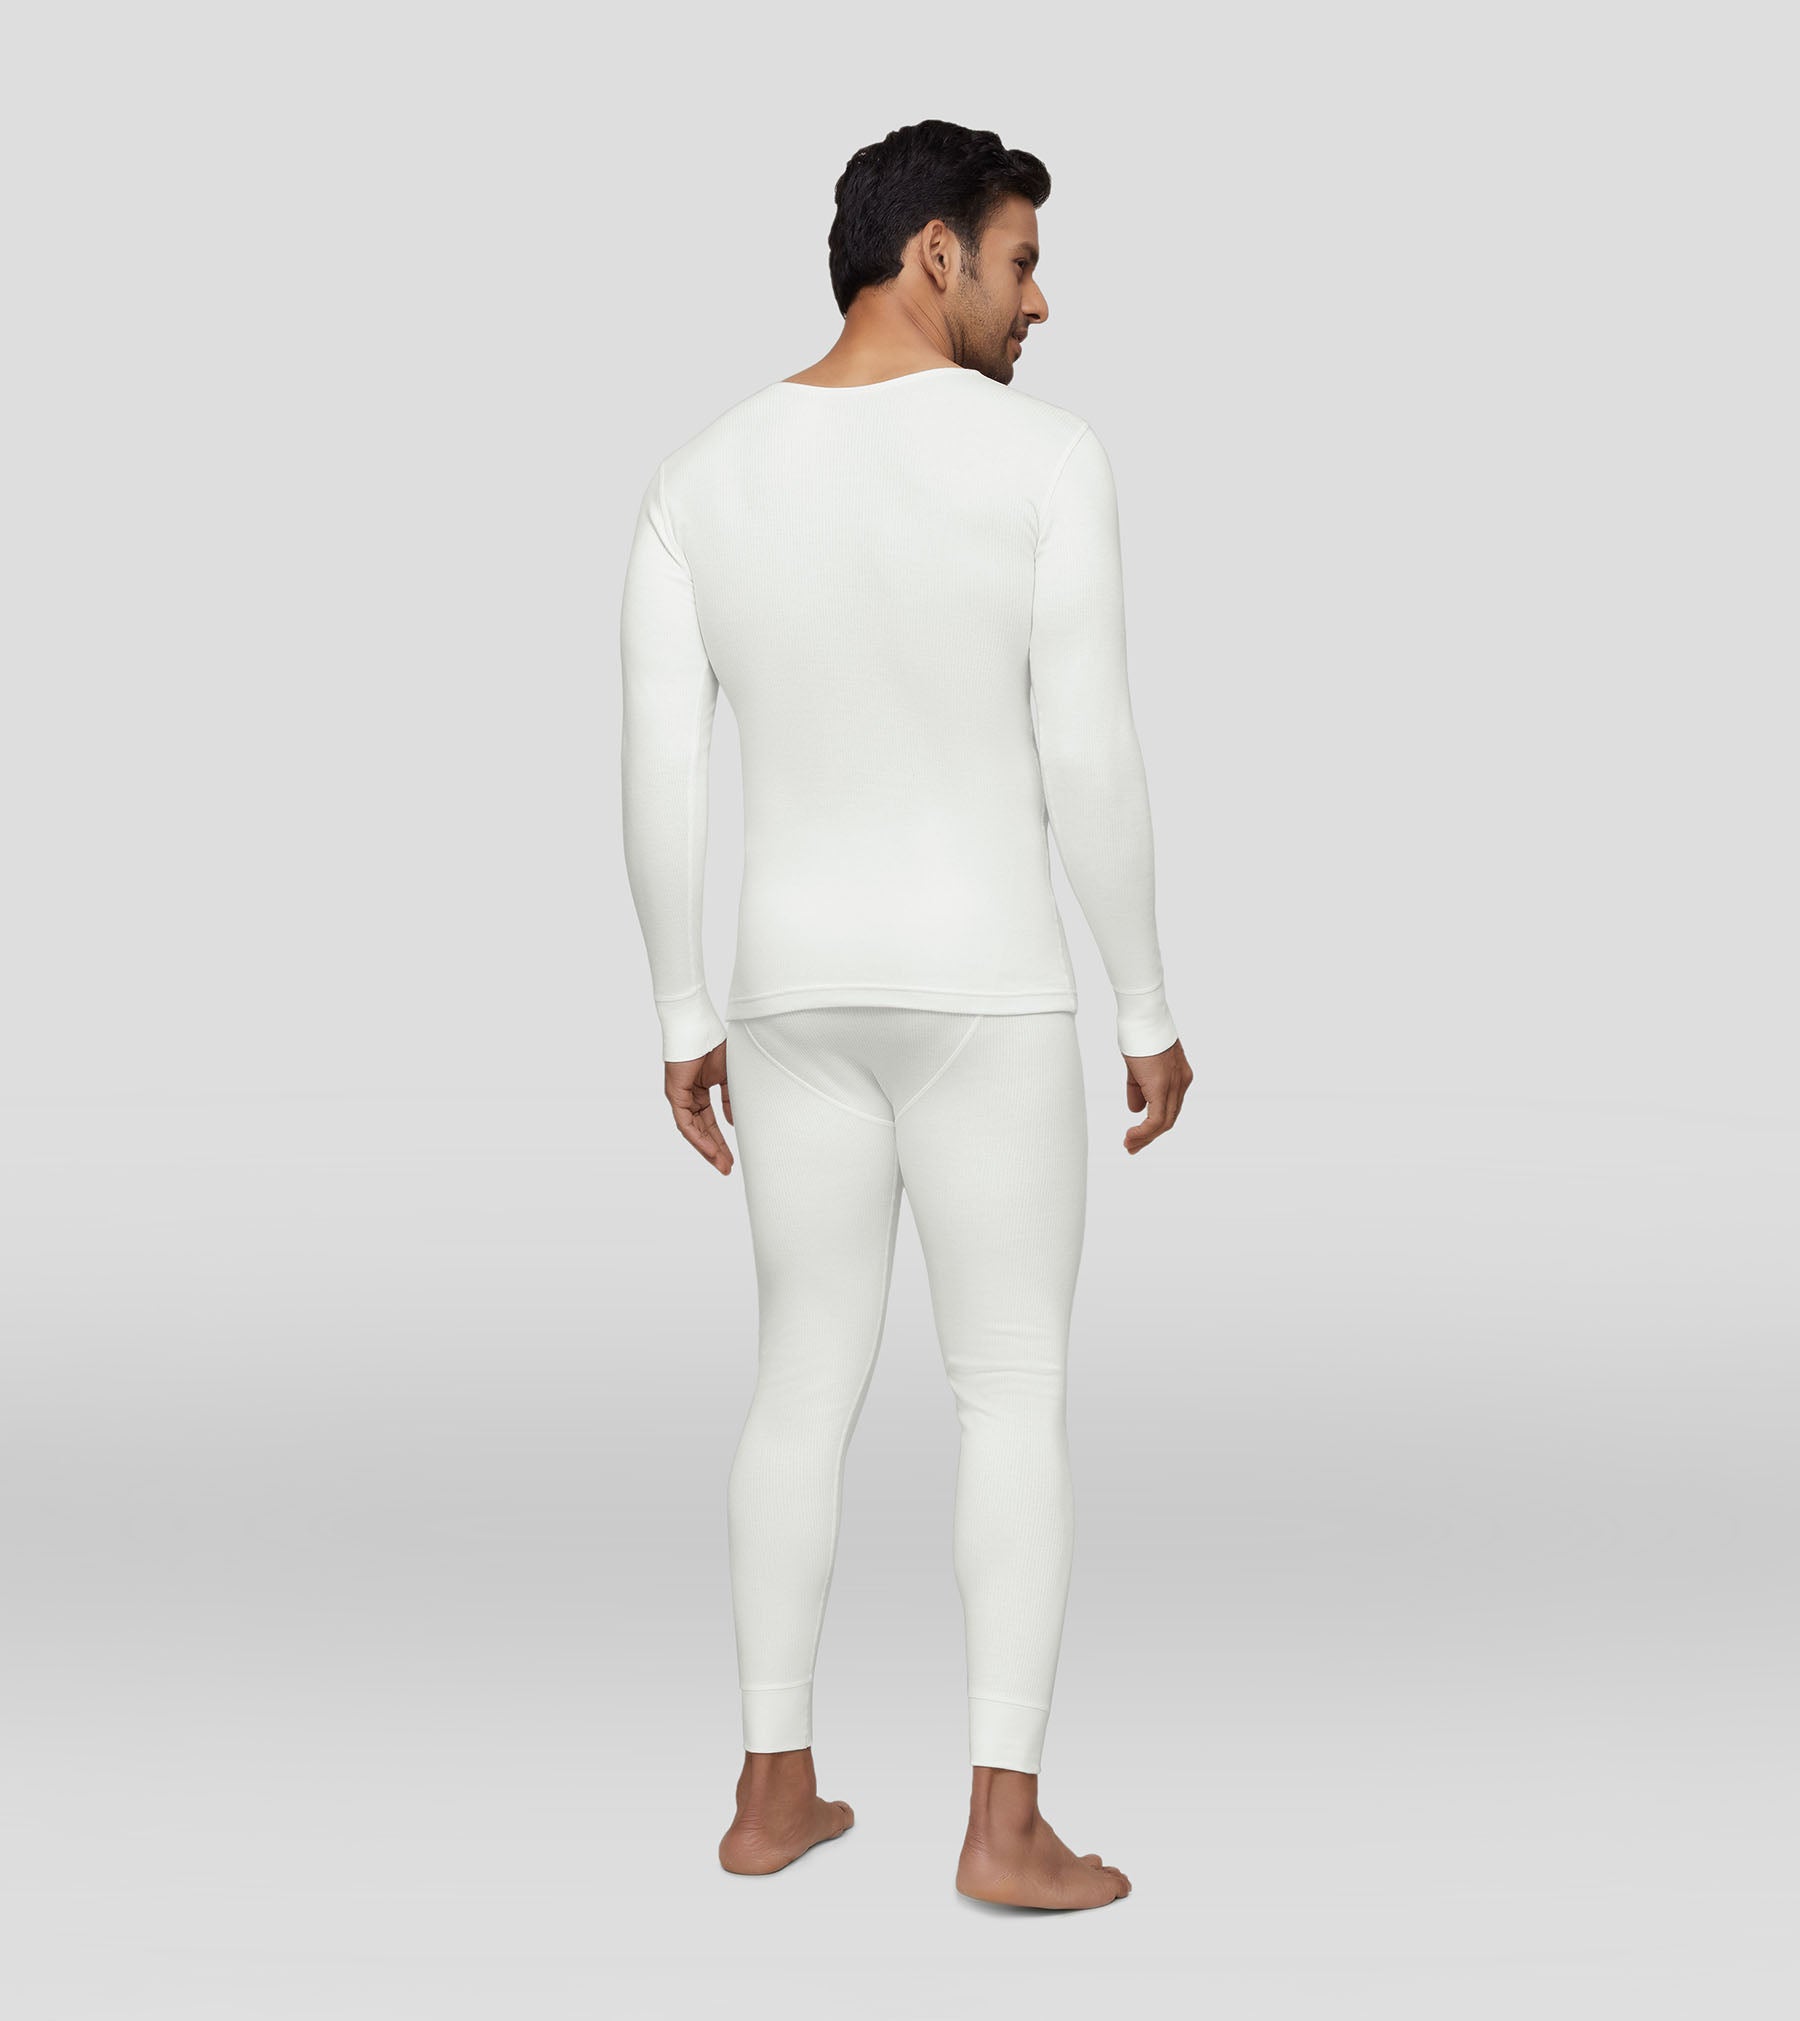 Alpine Cotton Rich Long Sleeve Thermal Set For Men Ivory White - XYXX Mens Apparels